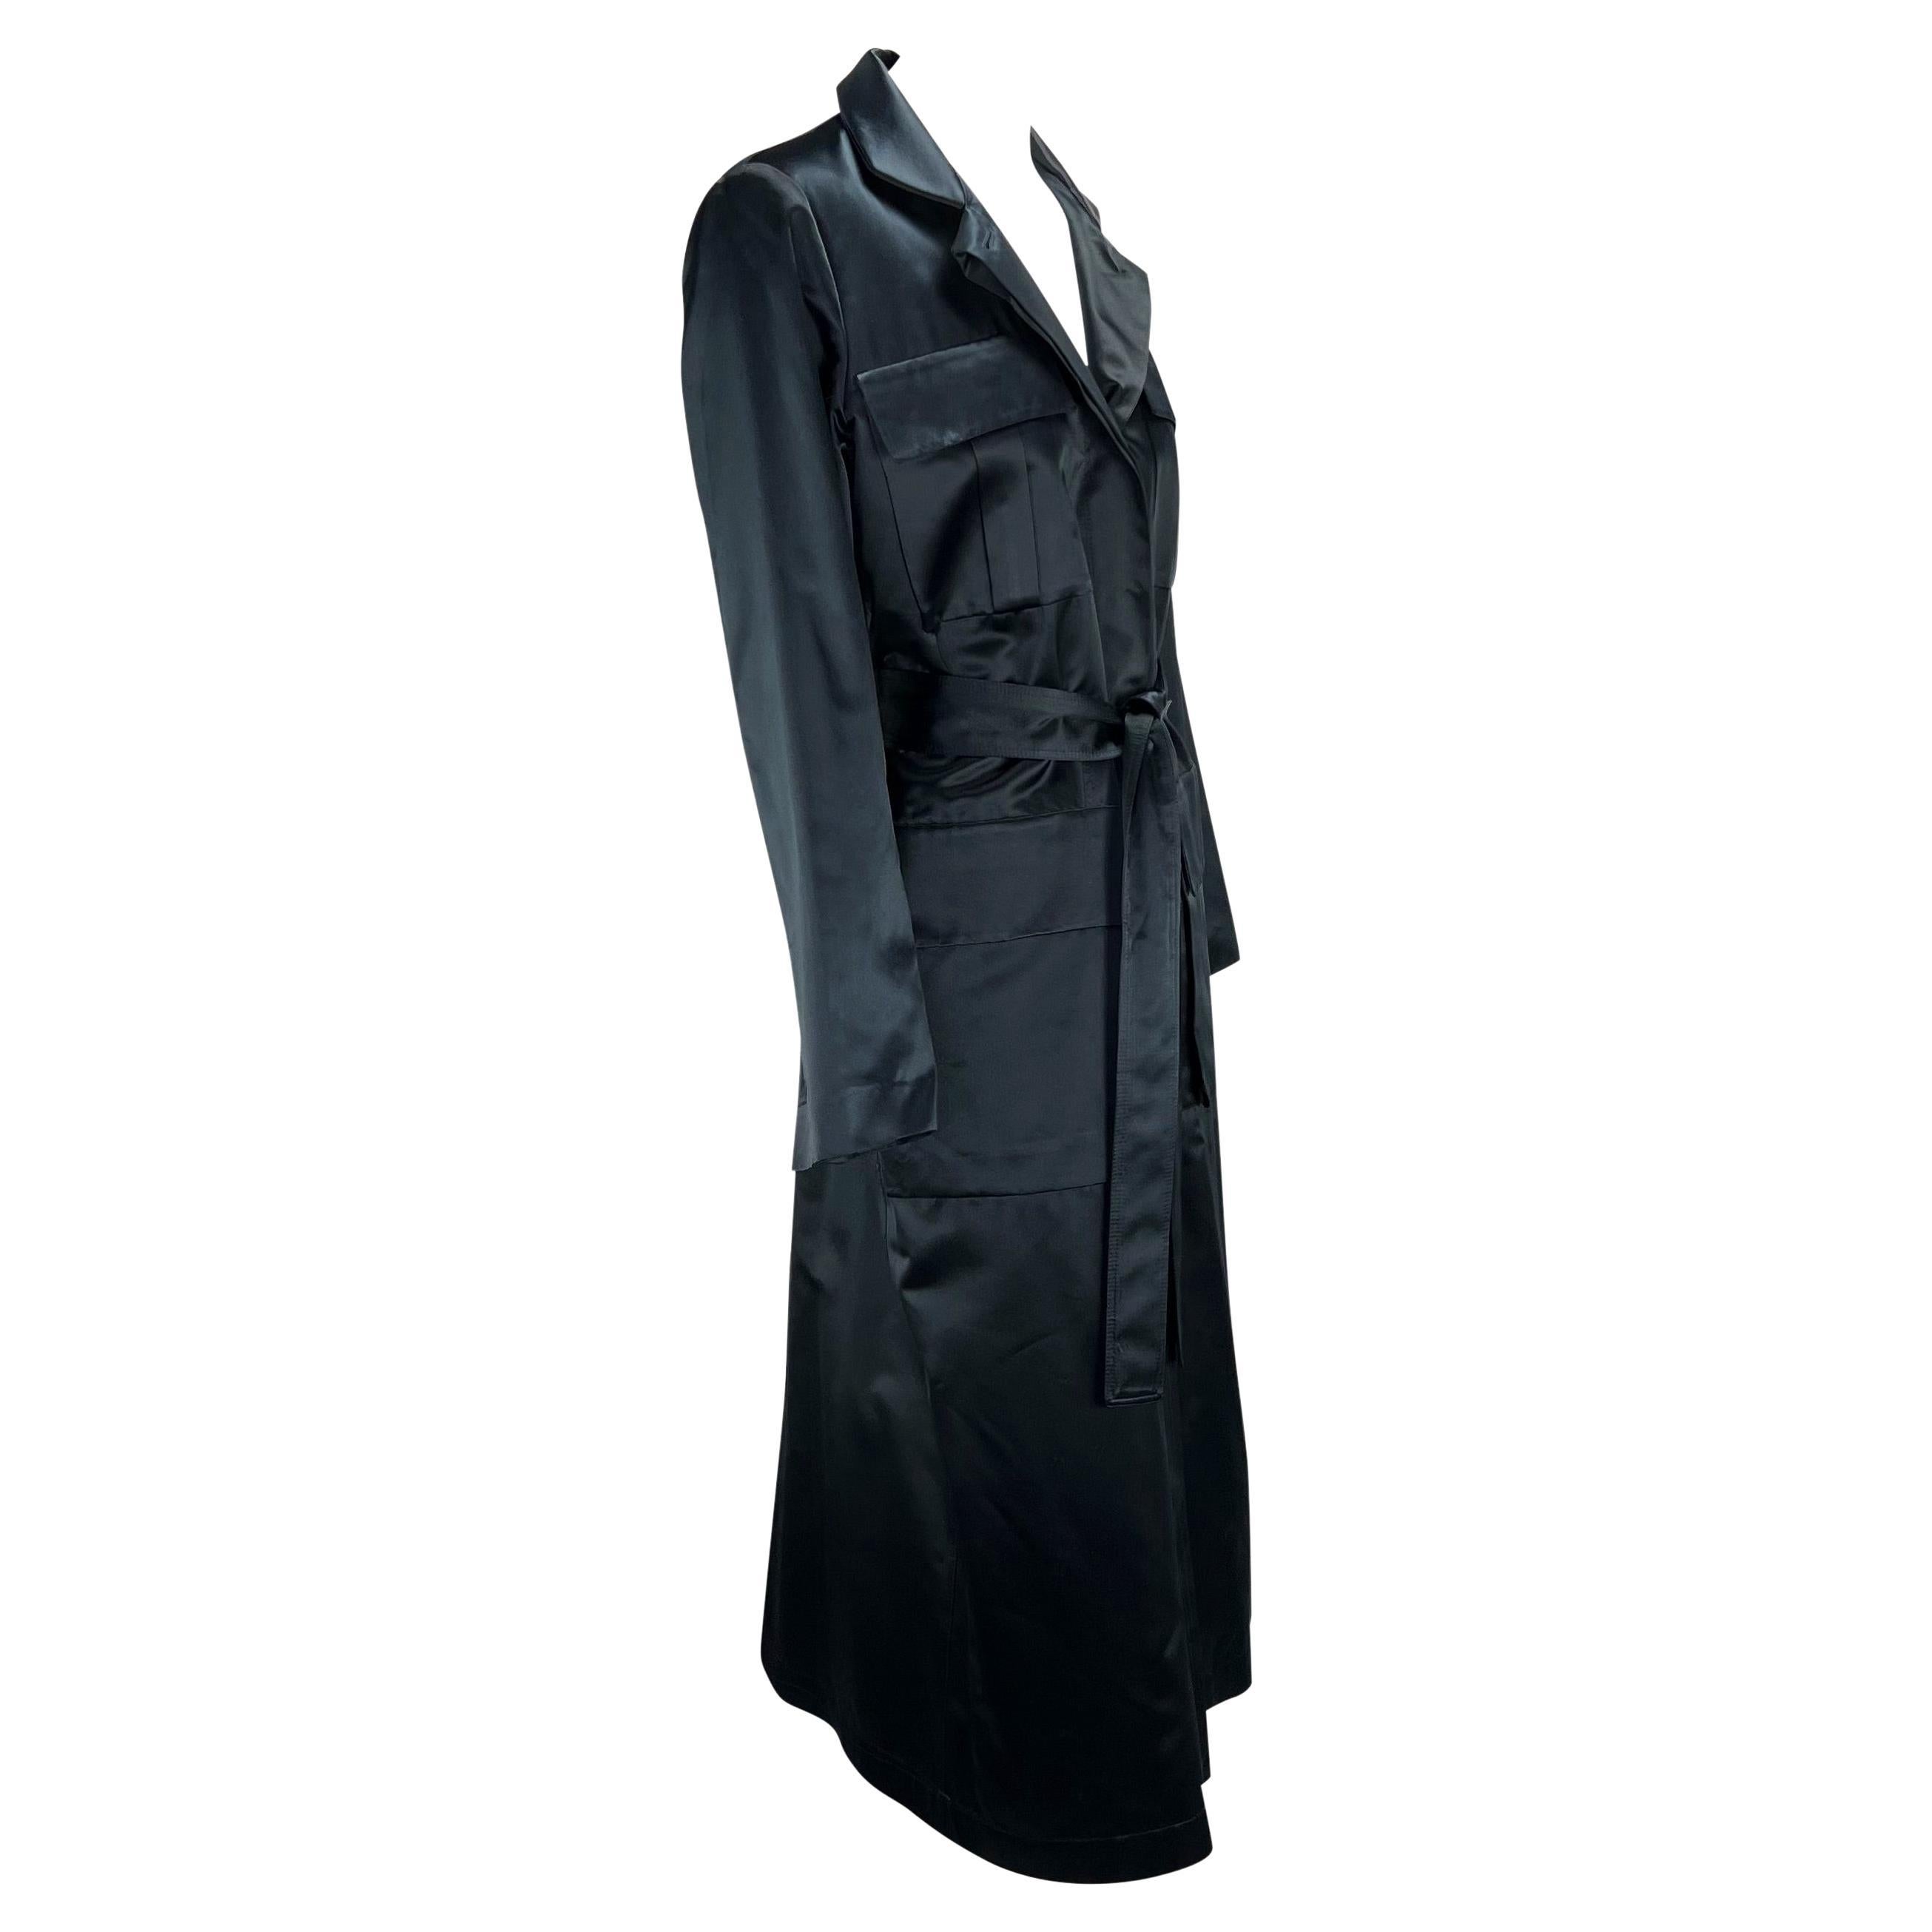 S/S 2001 Gucci by Tom Ford Trench en satin marine en vente 3